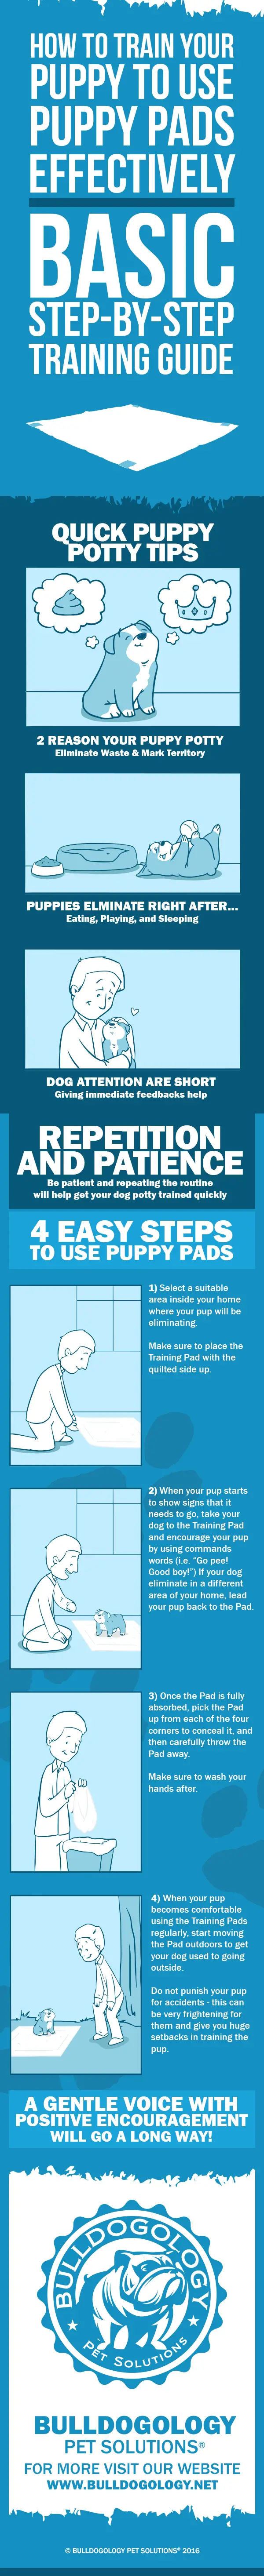 How to use puppy pads in 4 easy steps